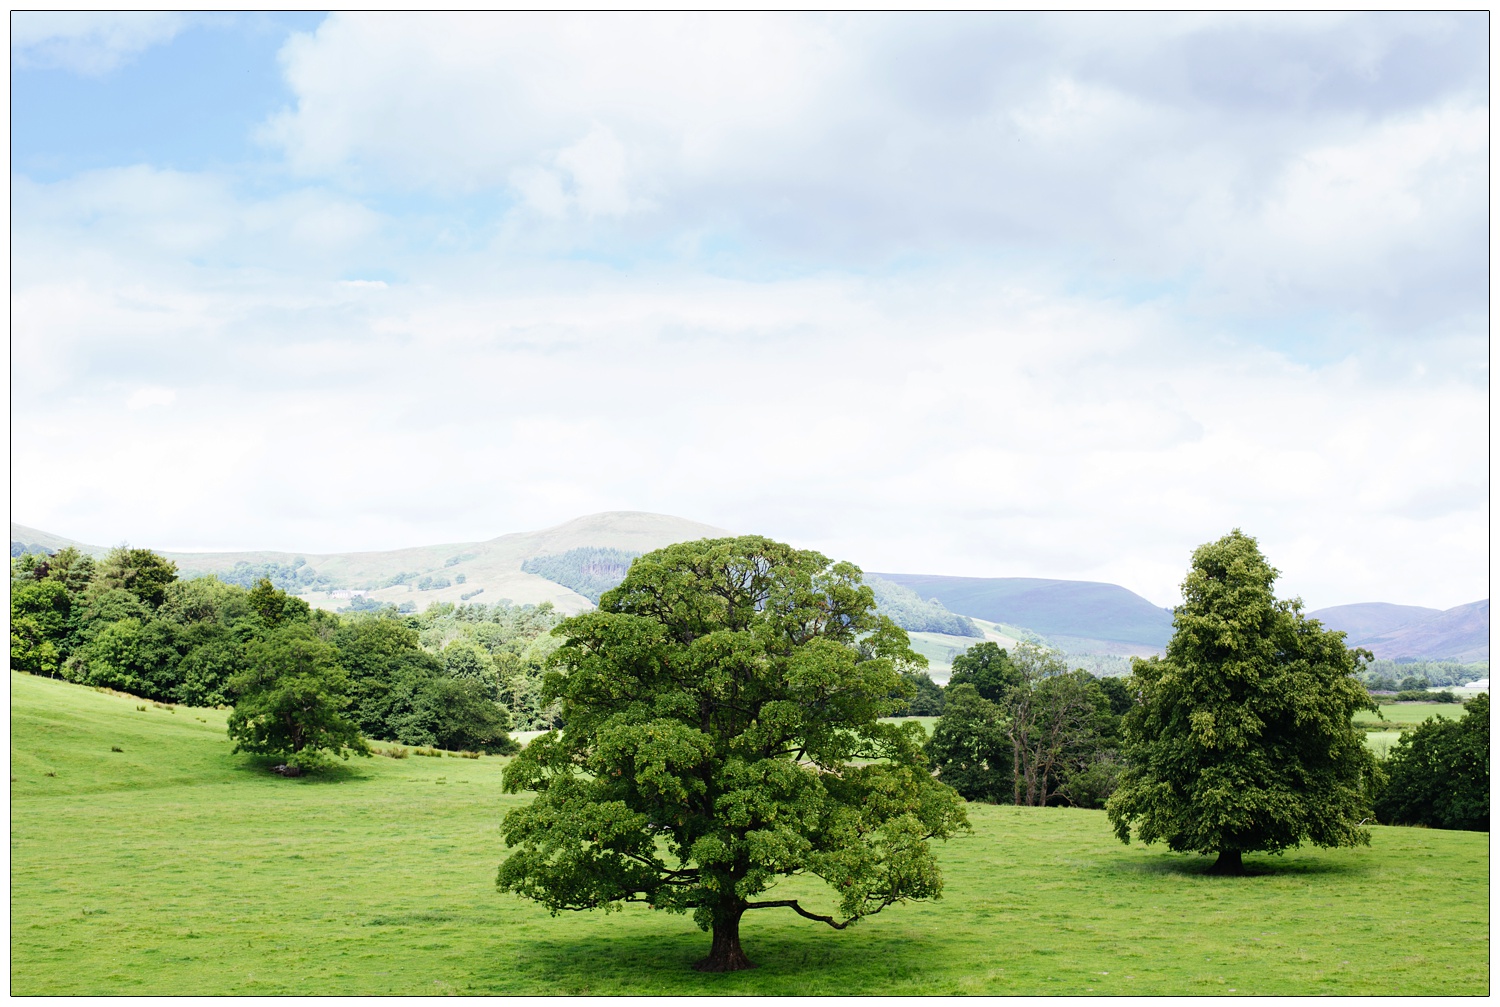 The countryside at the Inn at Whitewell, in the Forest of Bowland. There is a tree in the centre of the picture.